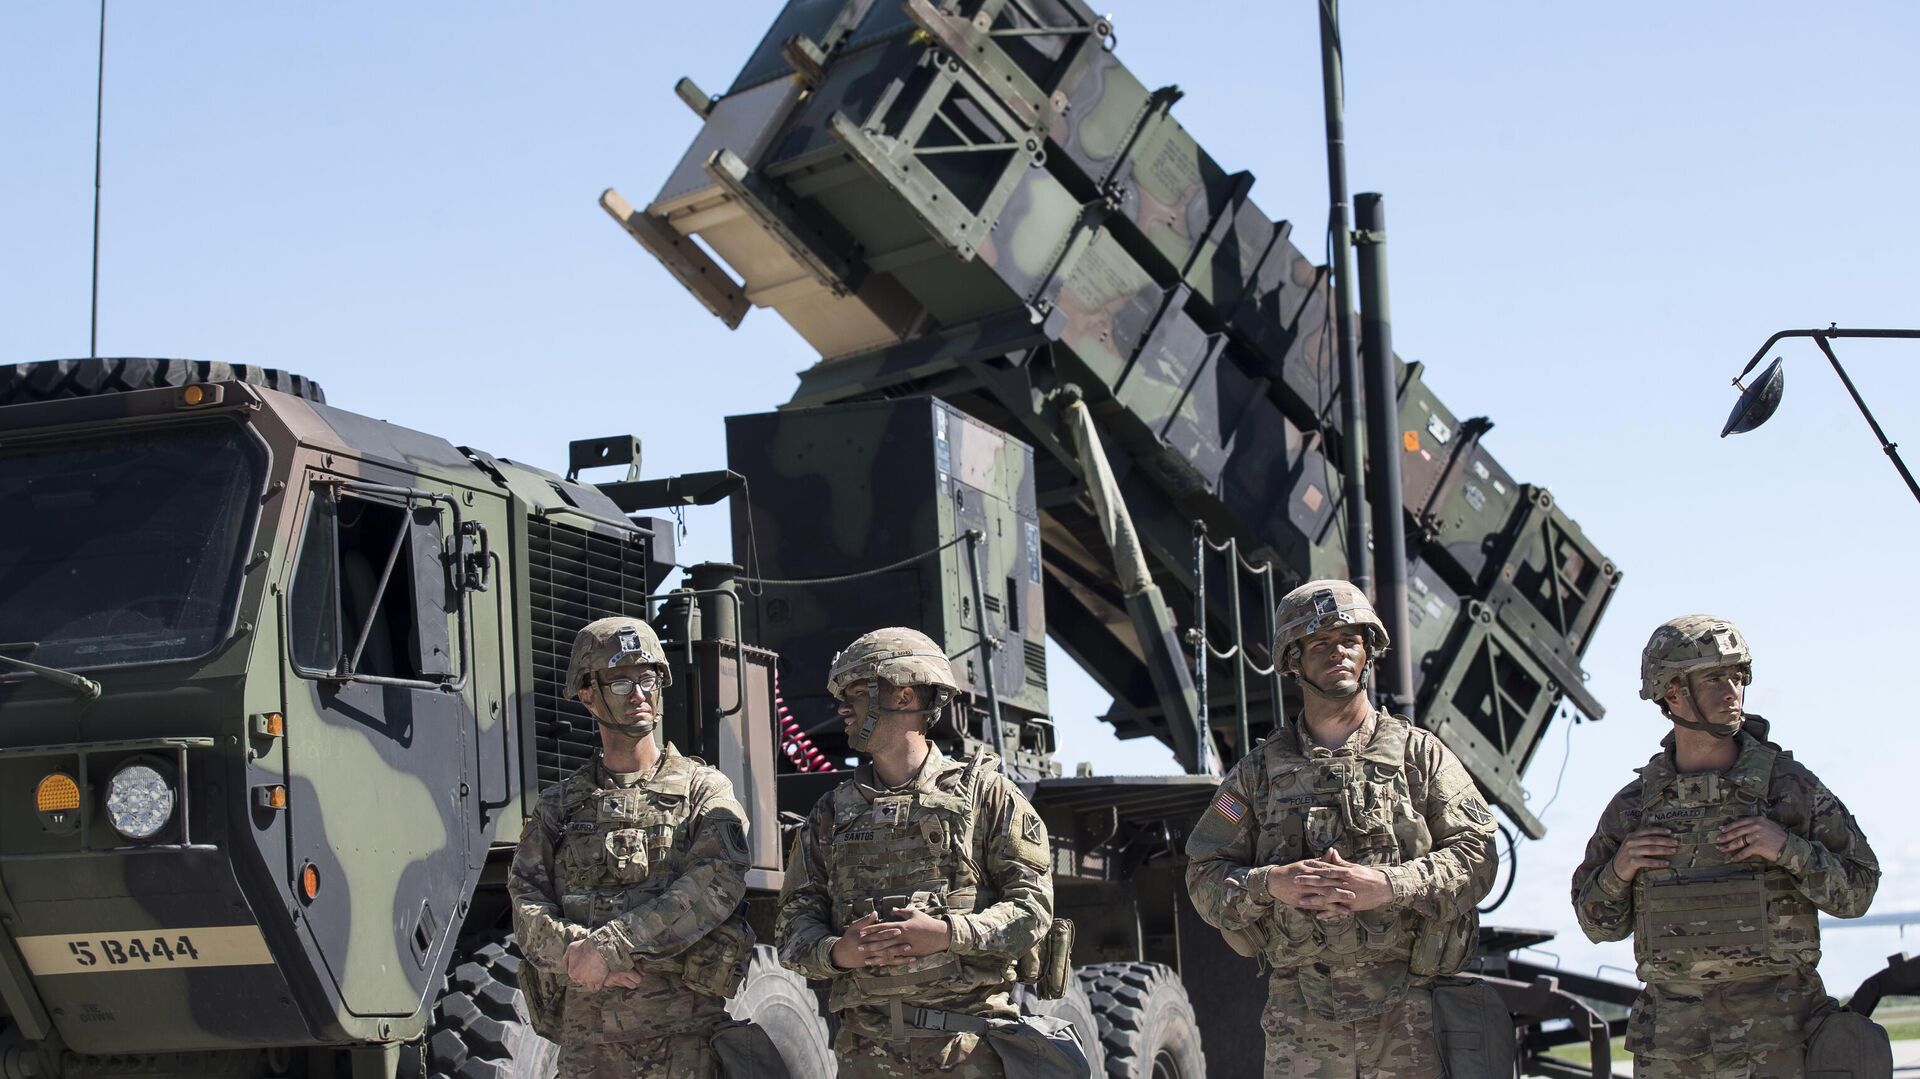 Members of US 10th Army Air and Missile Defense Command stands next to a Patriot surface-to-air missile battery during the NATO multinational ground based air defence units exercise Tobruq Legacy 2017 at the Siauliai airbase some 230 km. (144 miles) east of the capital Vilnius, Lithuania, on July 20, 2017 - Sputnik International, 1920, 11.01.2024